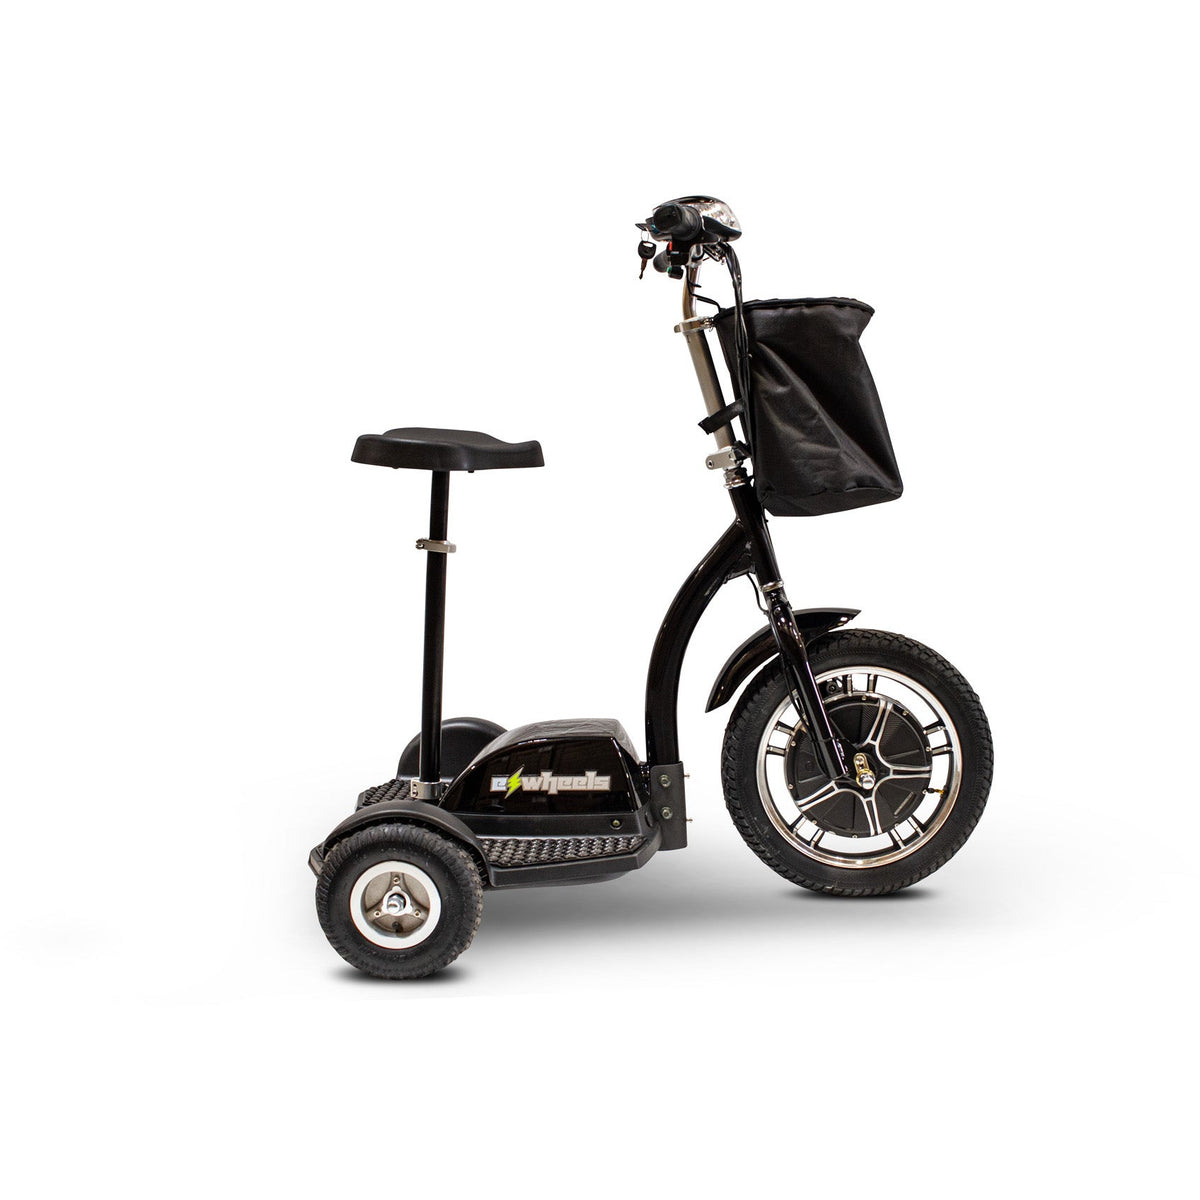 EWheels - EW 18 Stand-N-Ride Mobility Scooter